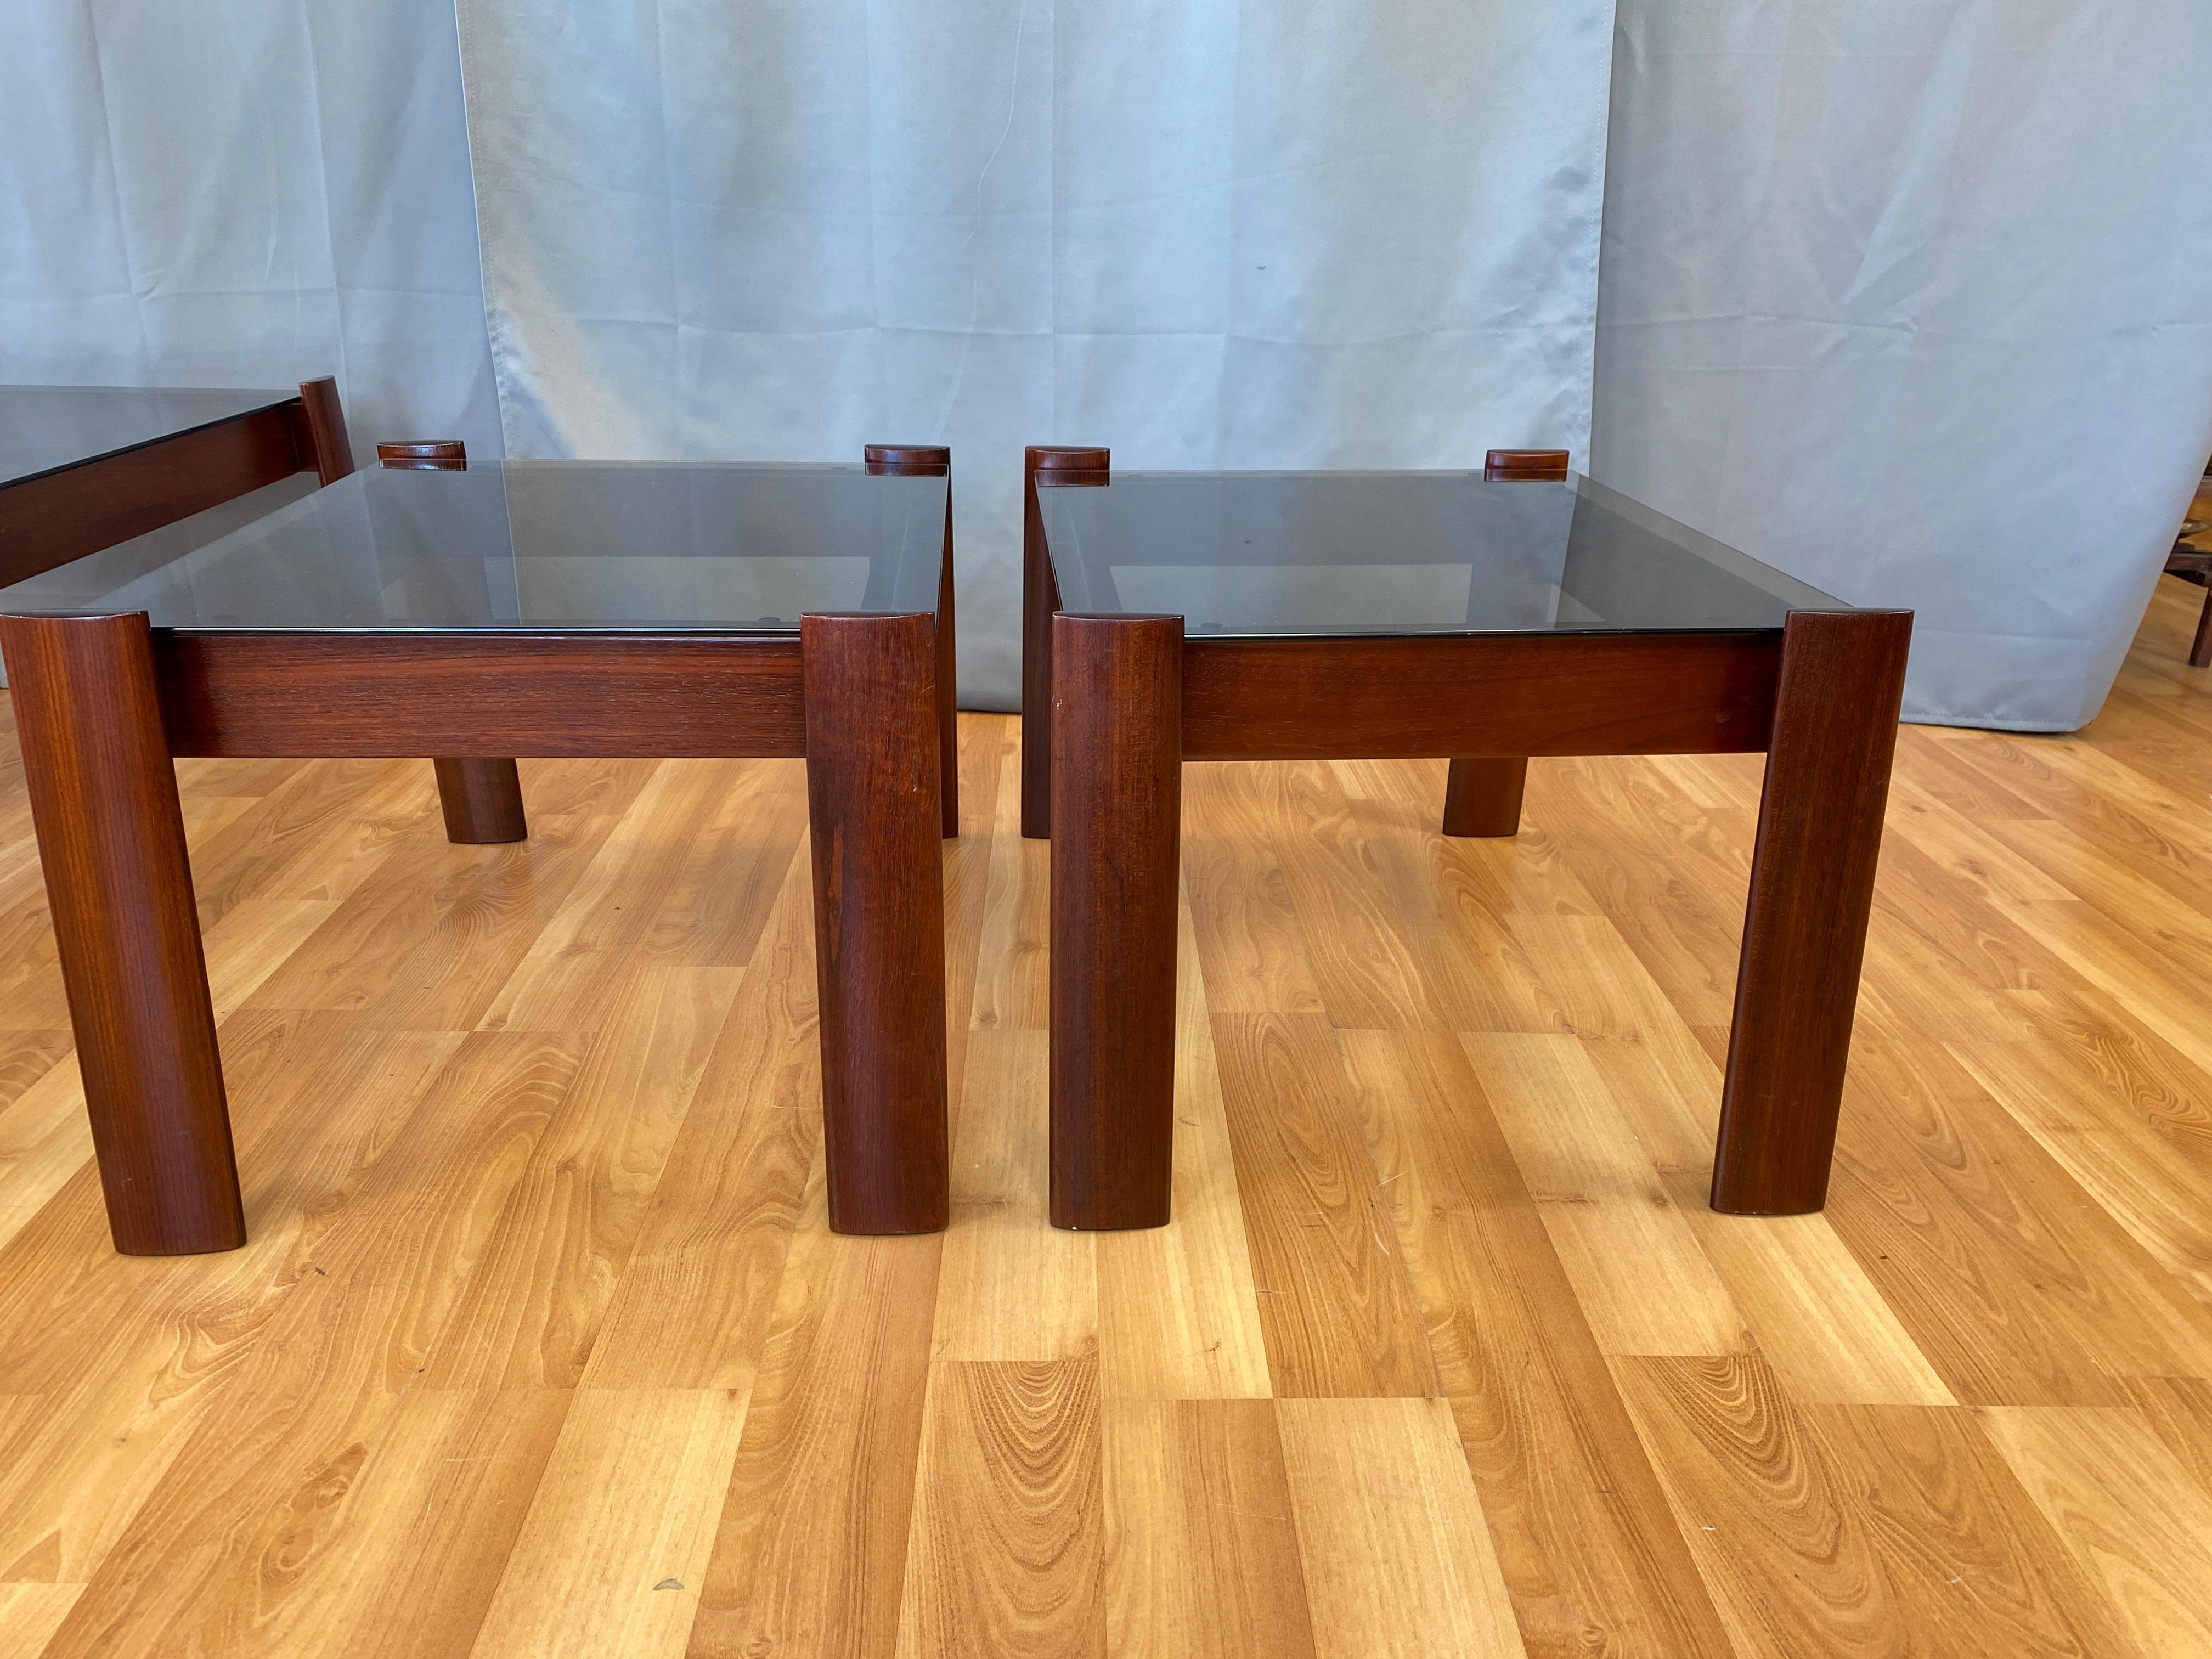 Glass 3-Piece Percival Lafer Designed Coffee and End Tables in Jacaranda Rosewood For Sale